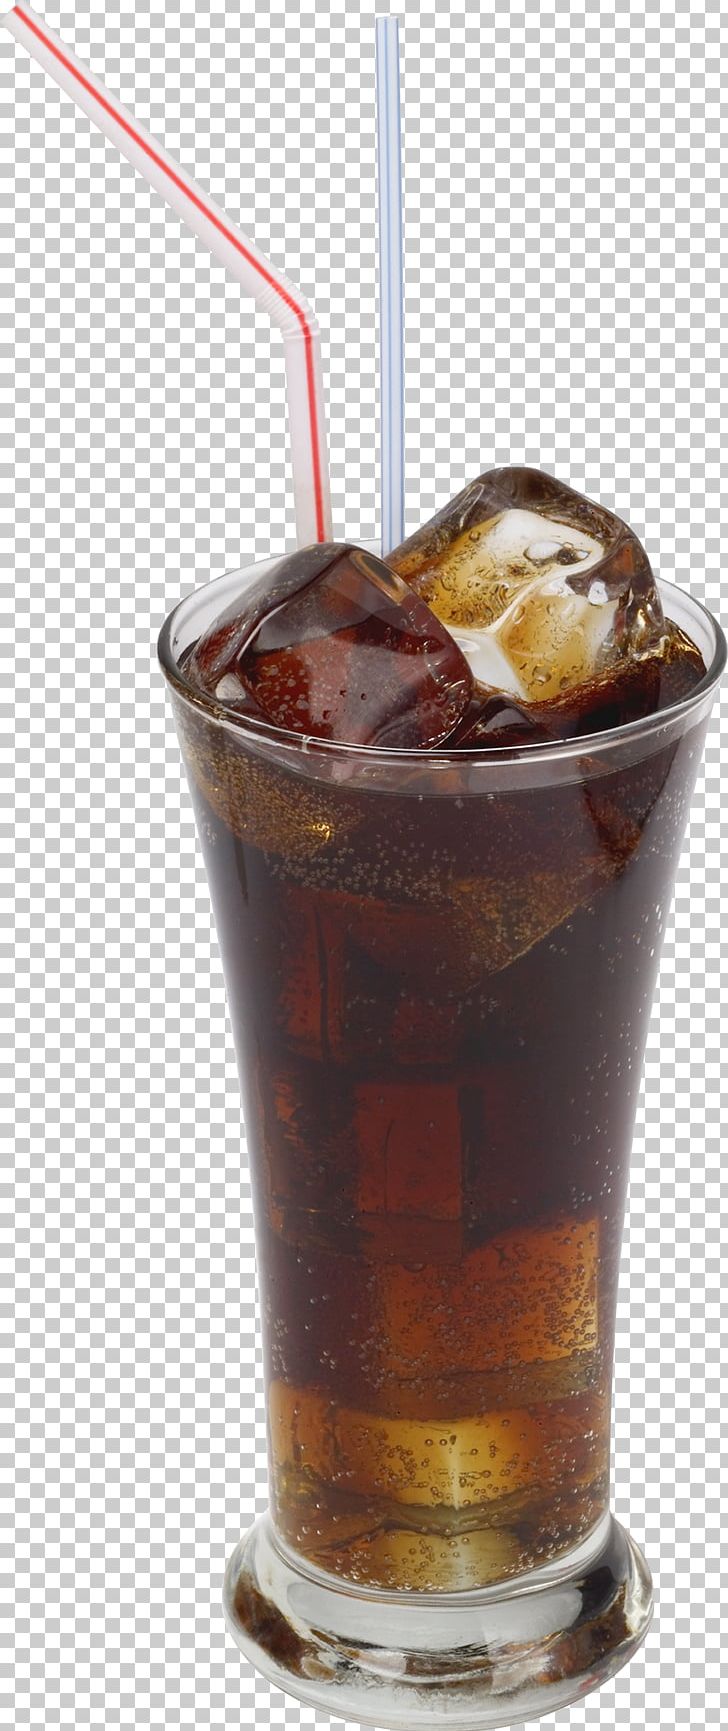 Fizzy Drinks Coca-Cola Tea Cocktail PNG, Clipart, Black Russian, Caramel Color, Carbonated Water, Cocacola, Cocktail Free PNG Download